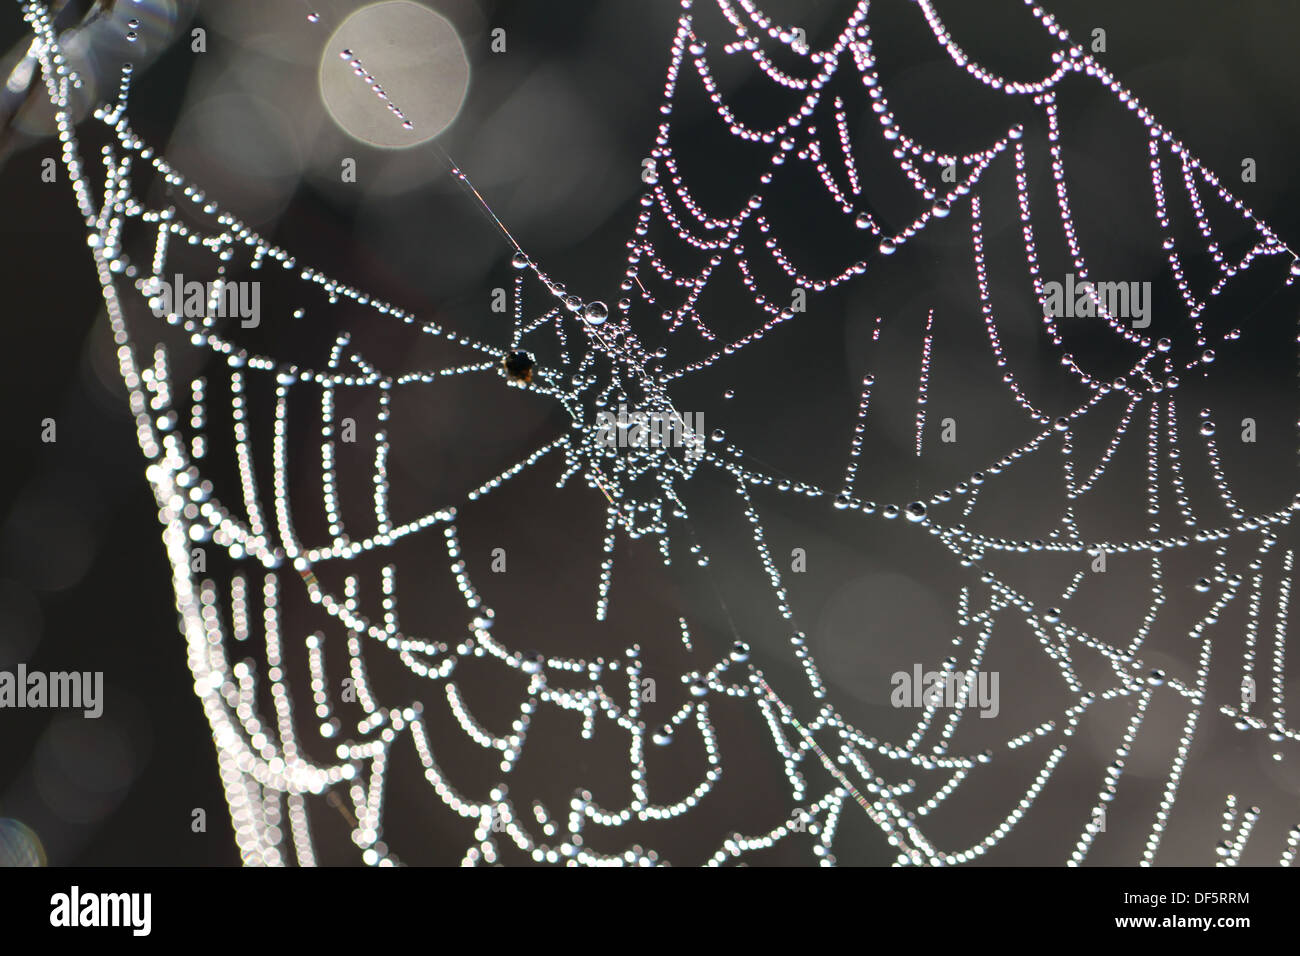 Spider web with drops Stock Photo